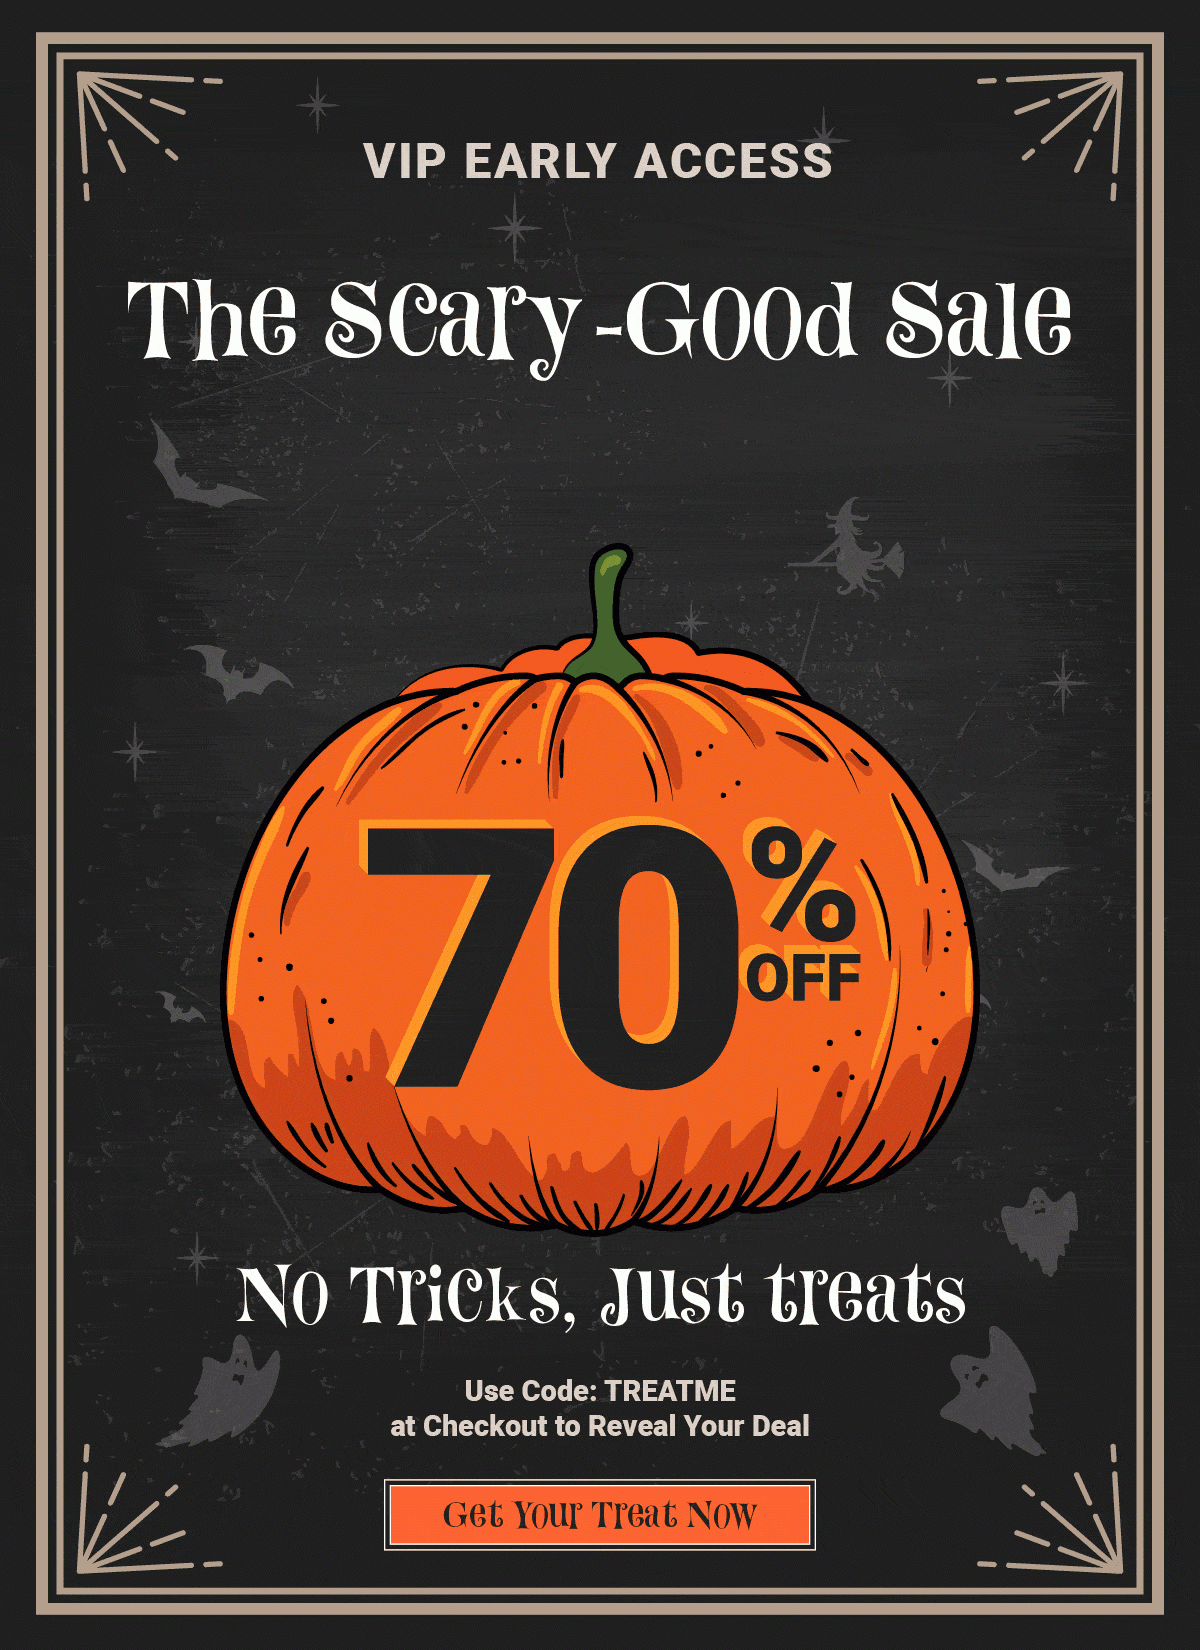 VIP Early Access The Scary-Good Sale. No Tricks, Just Treats! Use Code: TREATME At Checkout to Reveal Your Deal